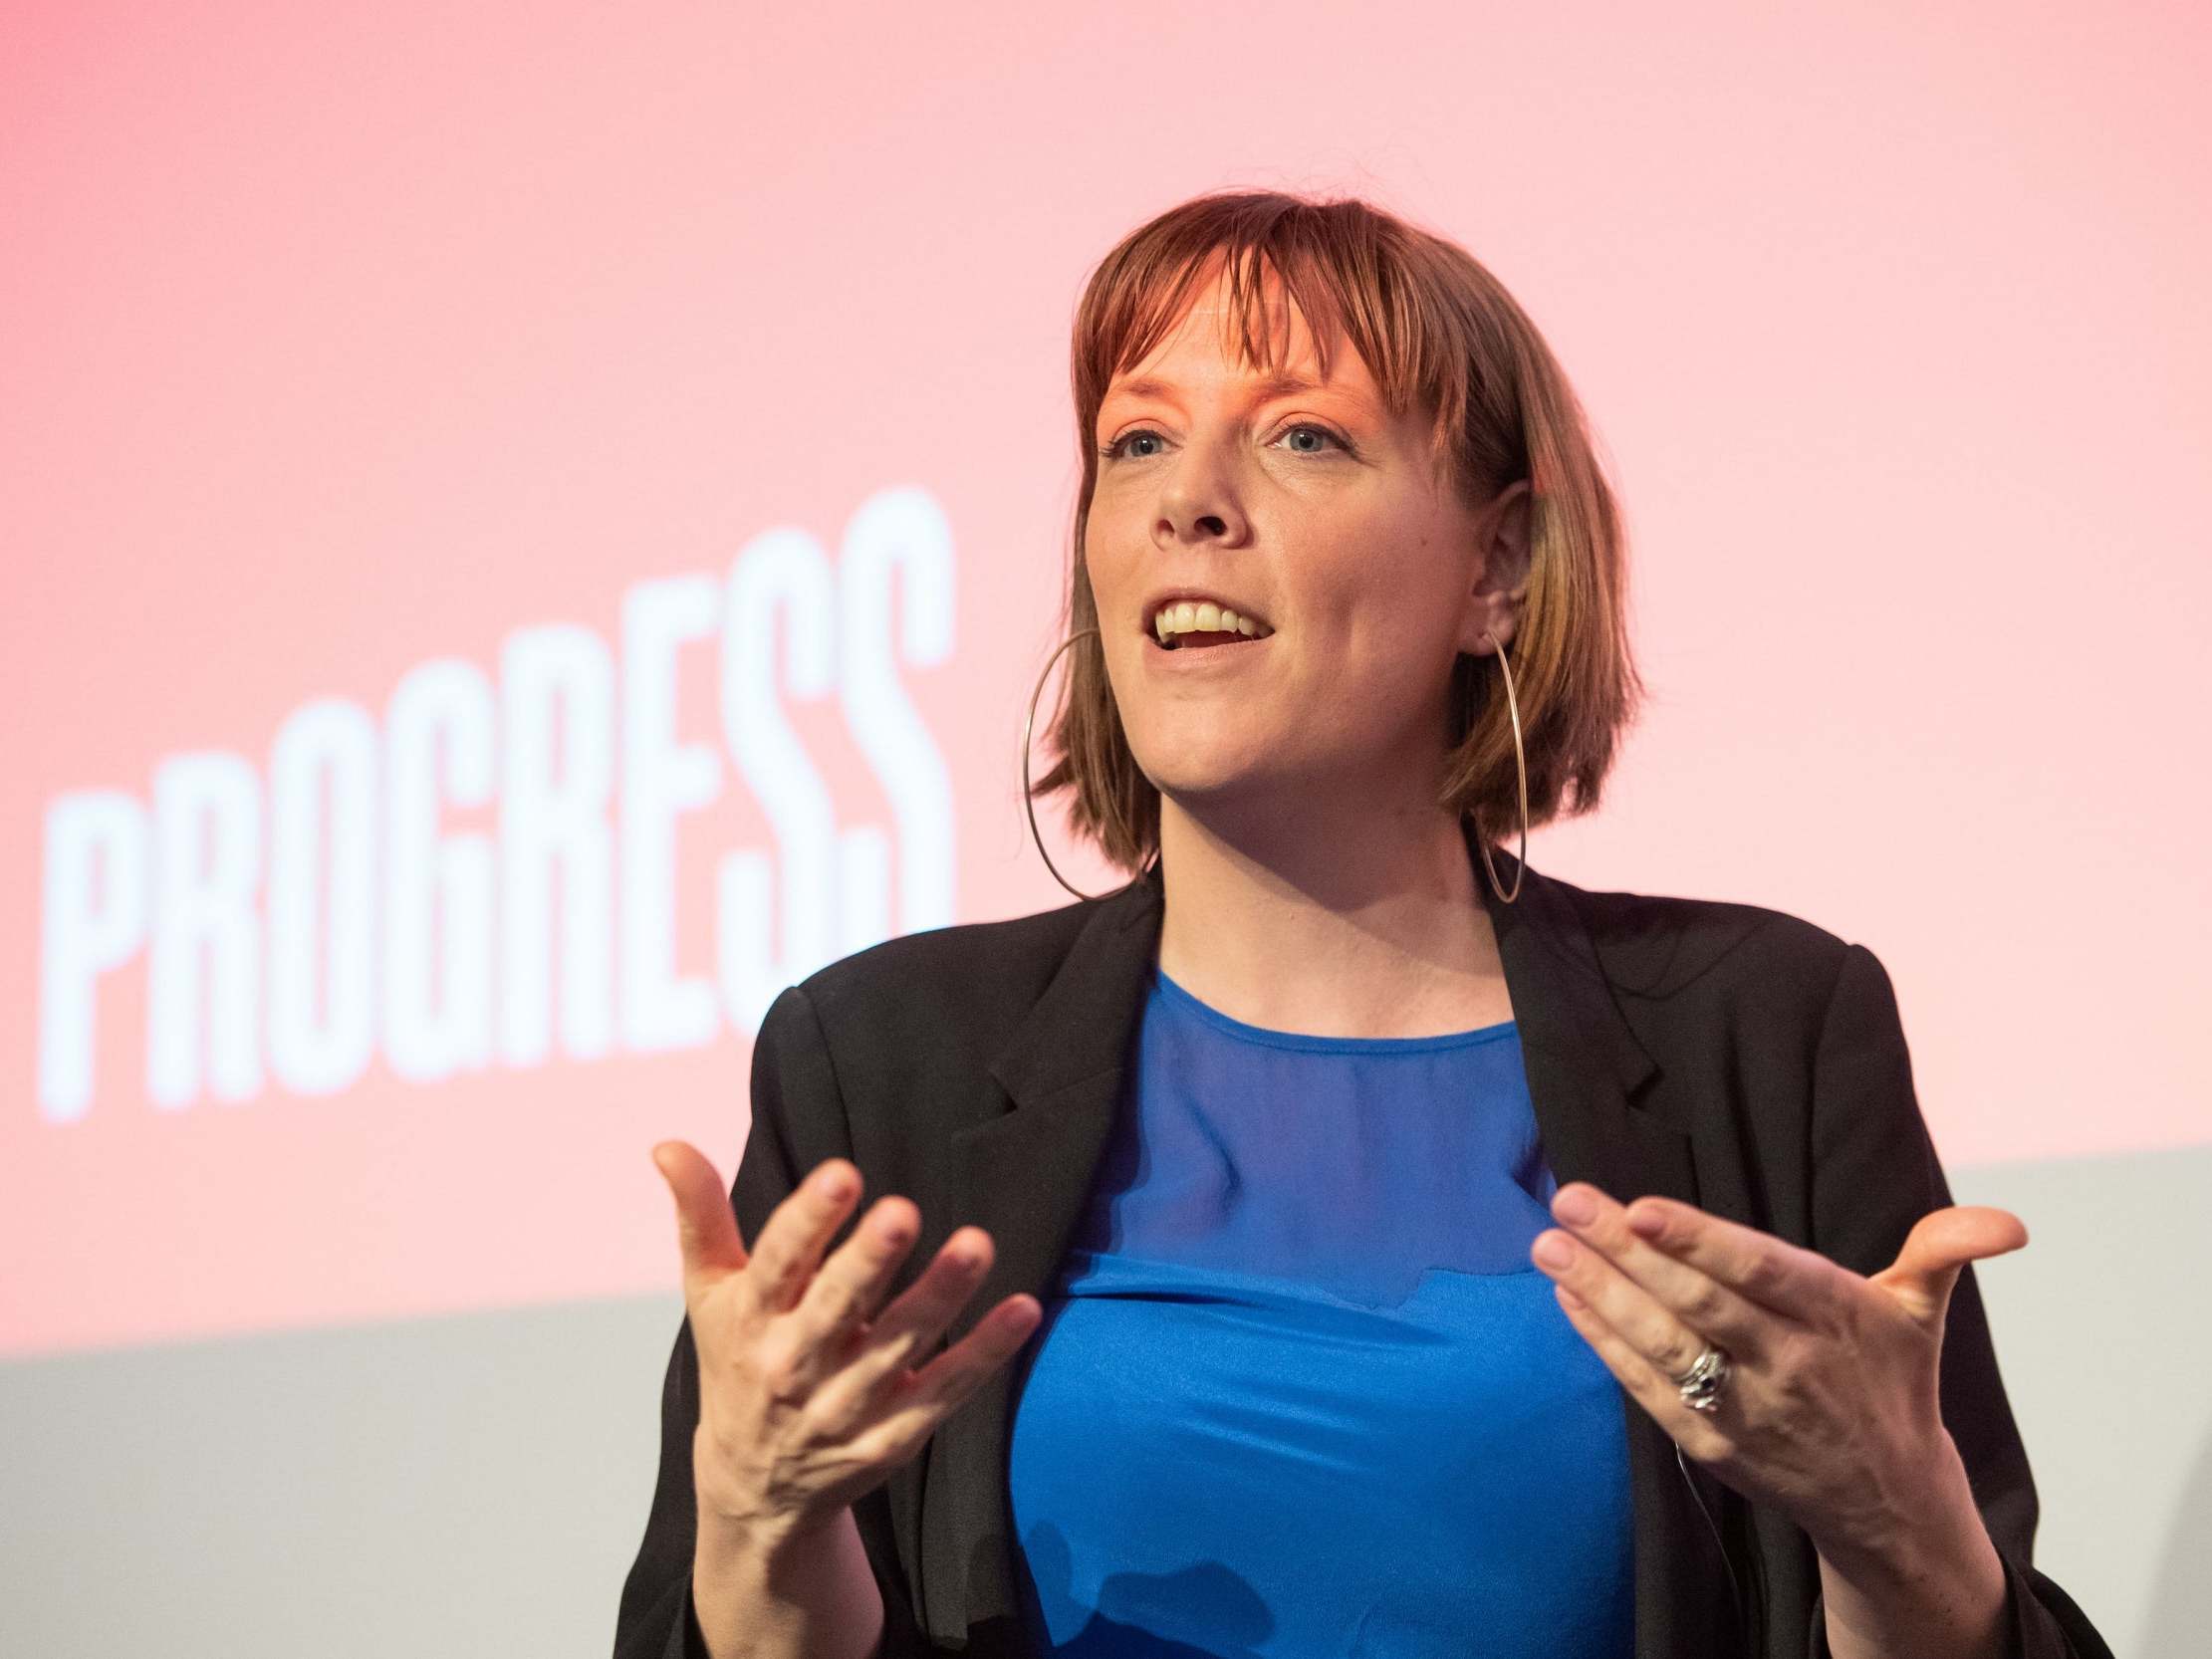 Jess Phillips’ nomination is largely made up of the remaining Blairite MPs inside the parliamentary Labour Party